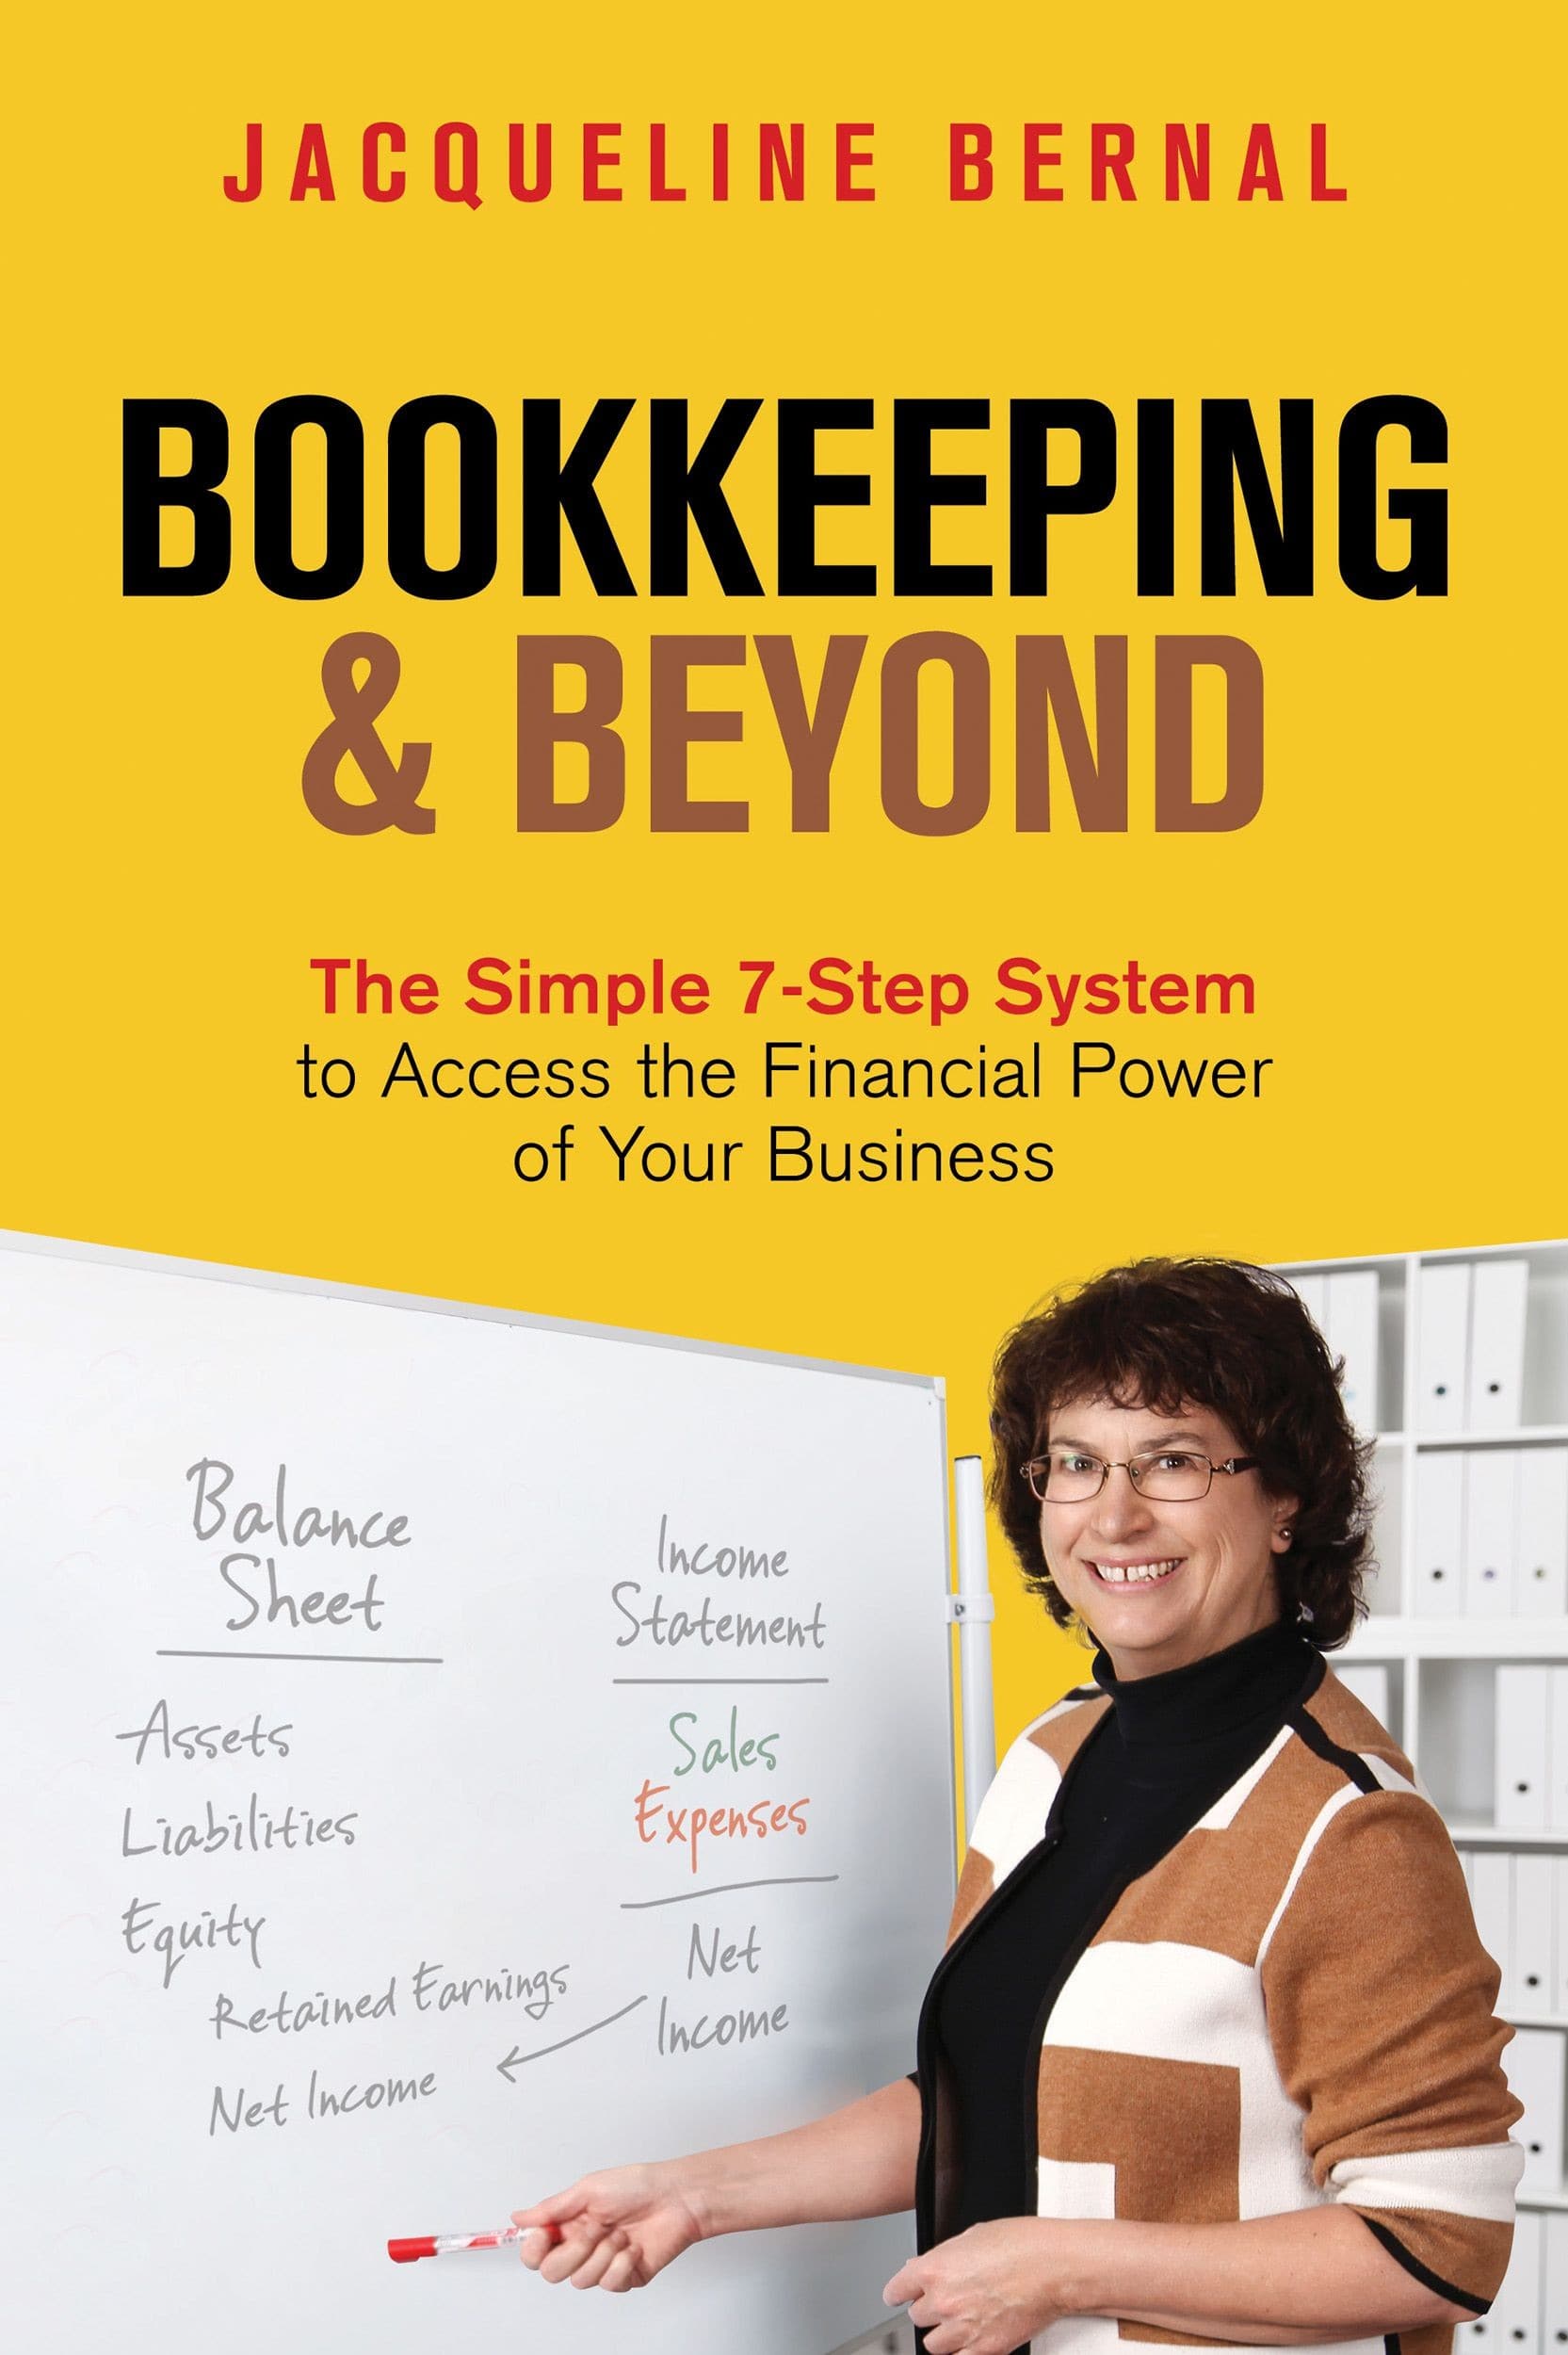 Image of the book, Bookkeeping and Beyond: The Simple 7 Step System to Access the Financial Power of Your Business.